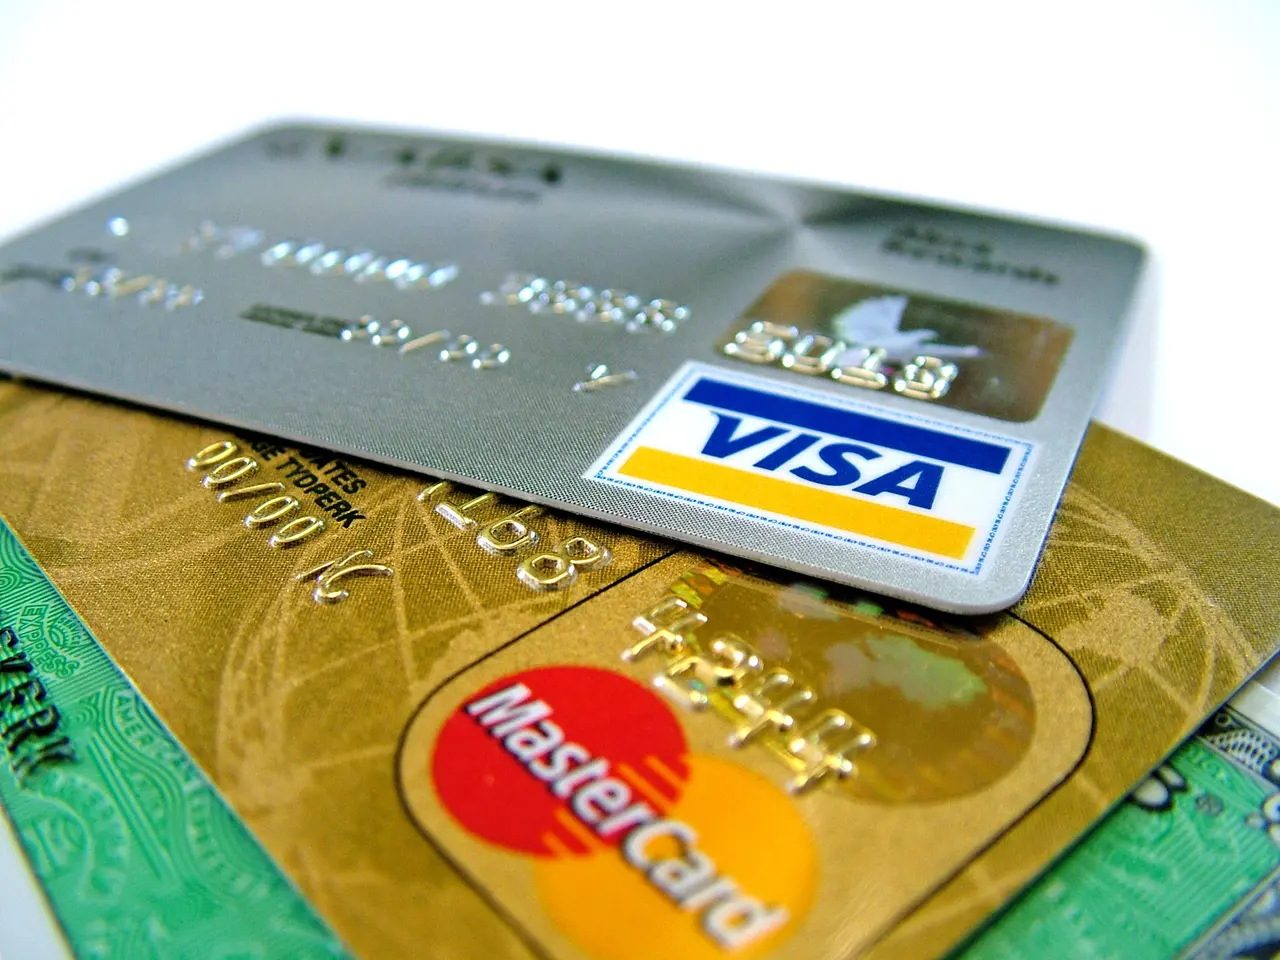 image of various credit cards